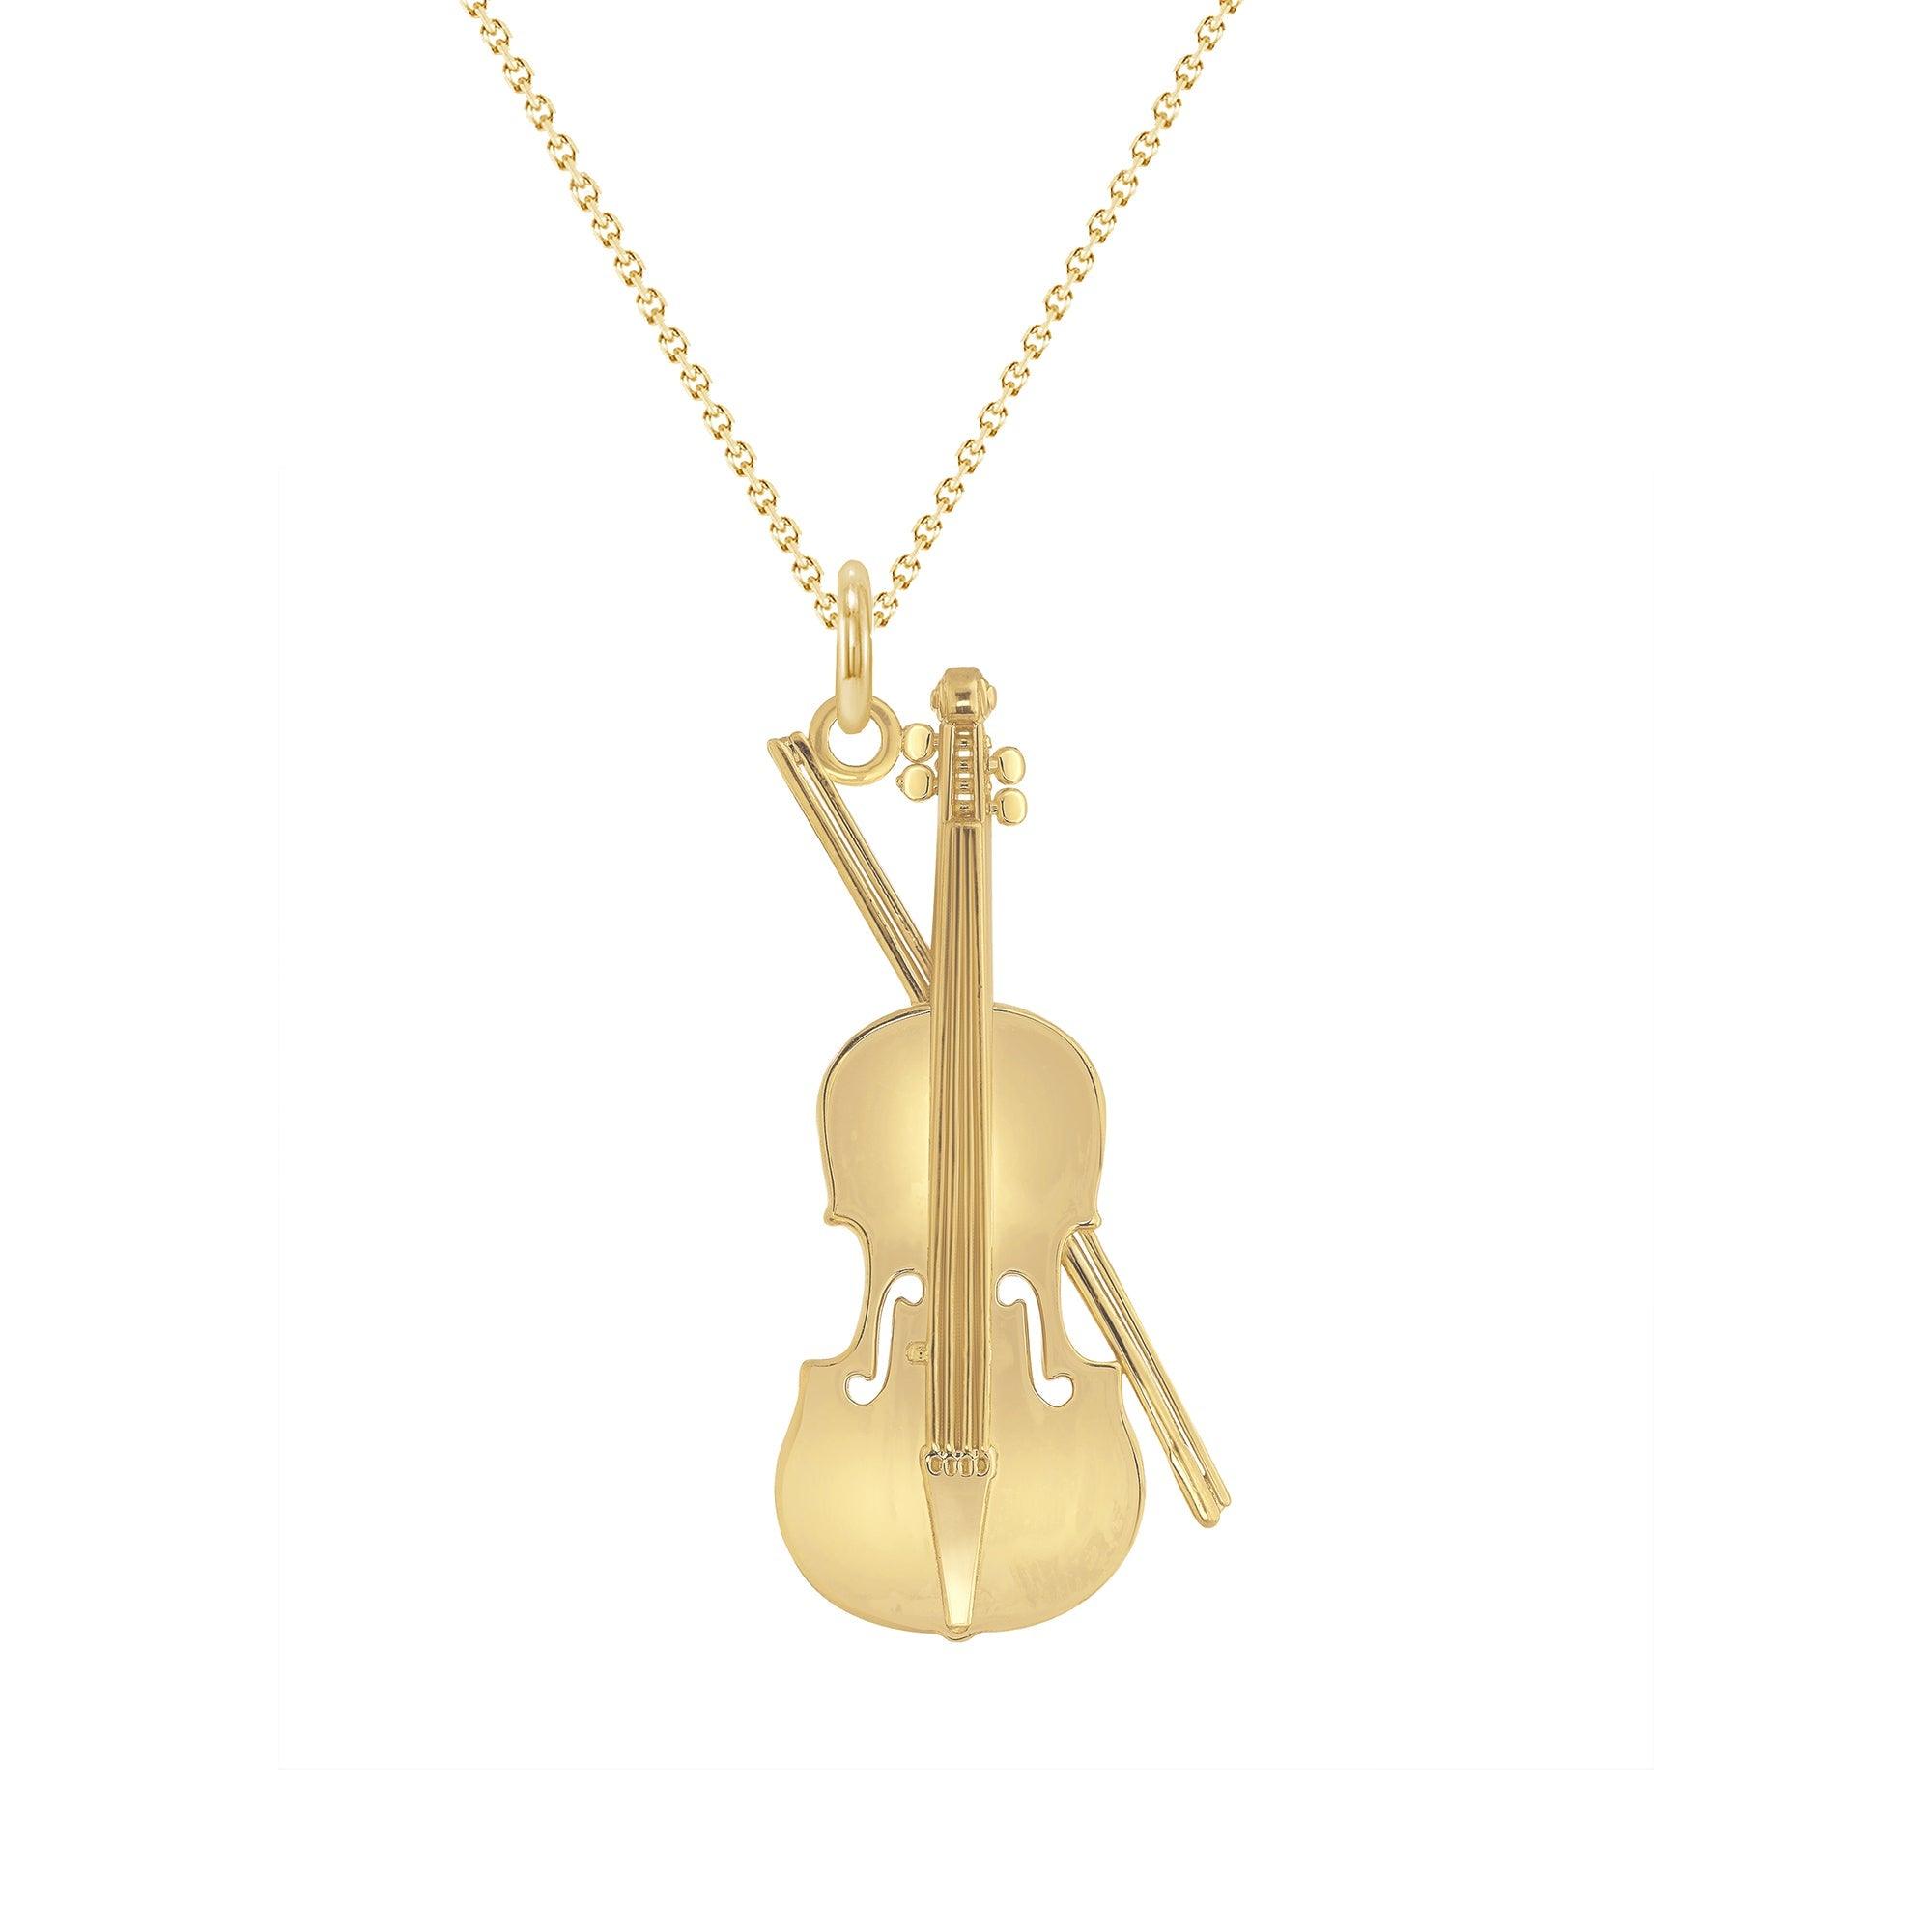 Large Solid Gold Musical Violin Pendant Necklace from Rafi's Jewelry